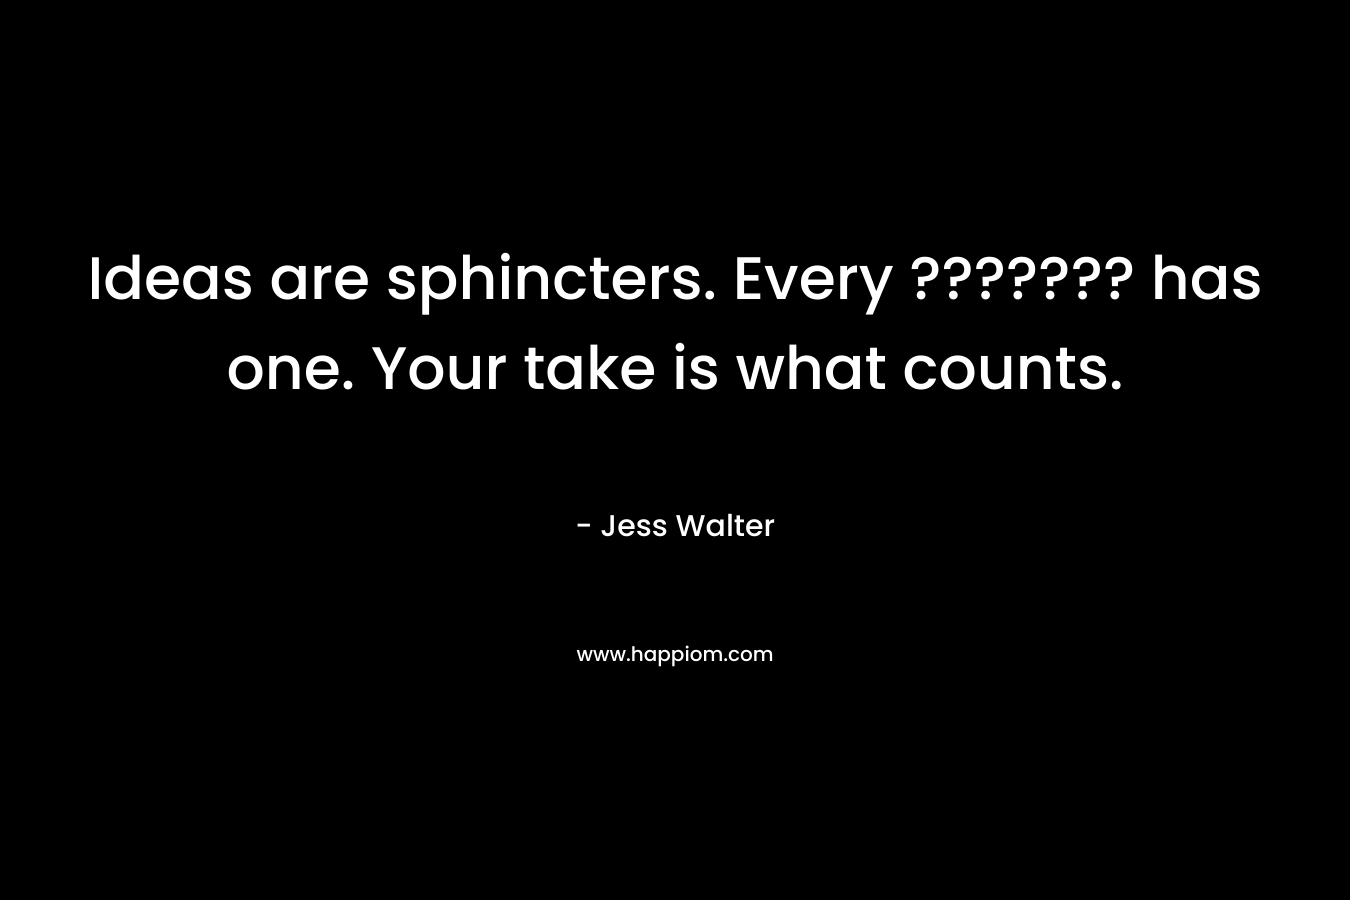 Ideas are sphincters. Every ??????? has one. Your take is what counts. – Jess Walter